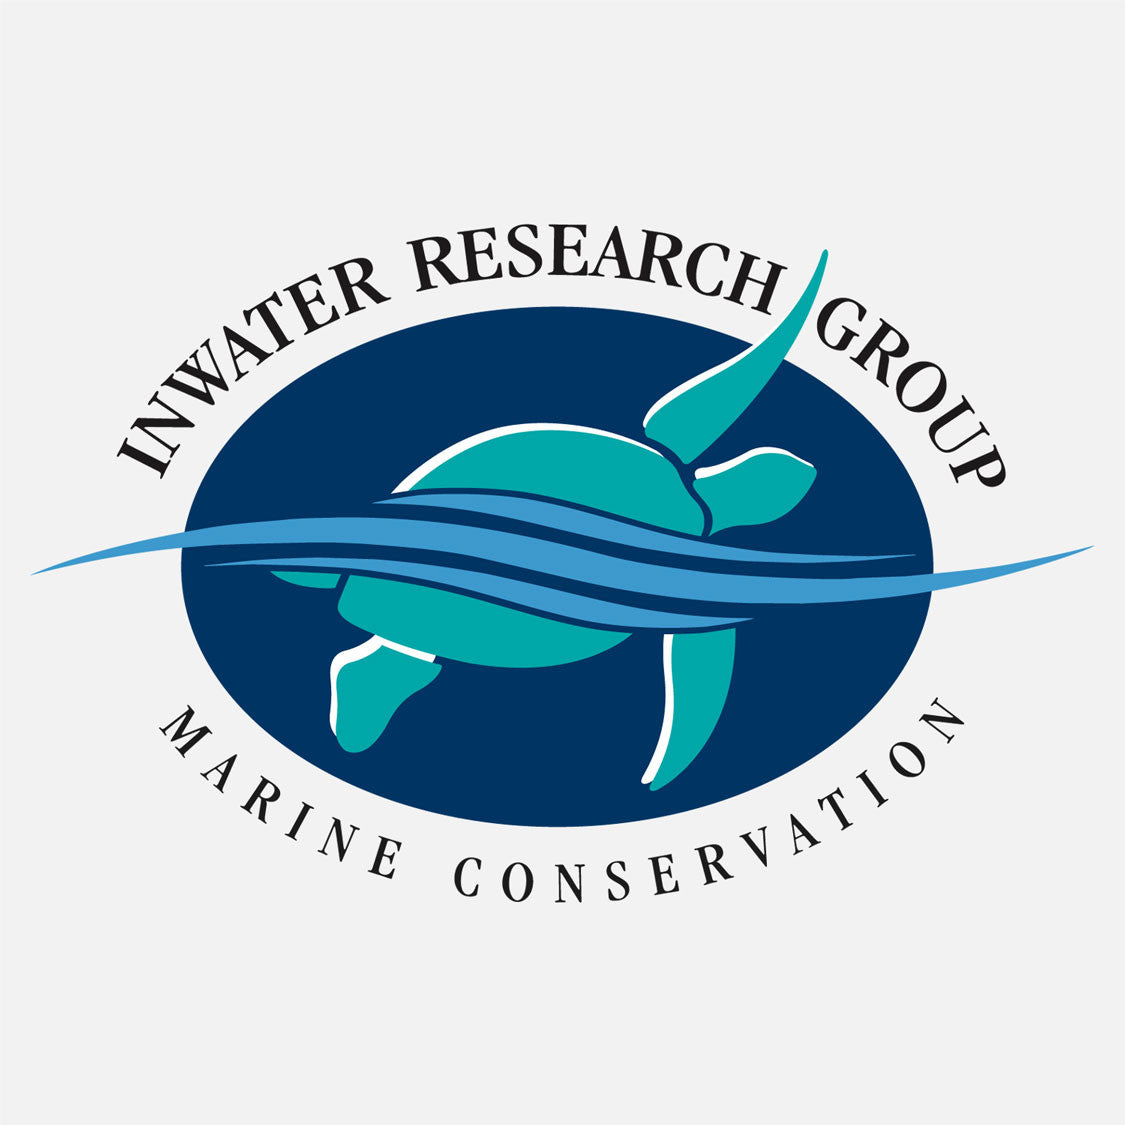 A not-for-profit corporation whose mission is to provide the scientific community and general public with information to promote conservation of coastal and marine species and their habitats. The logo is a graphic sea turtle swimming through water.